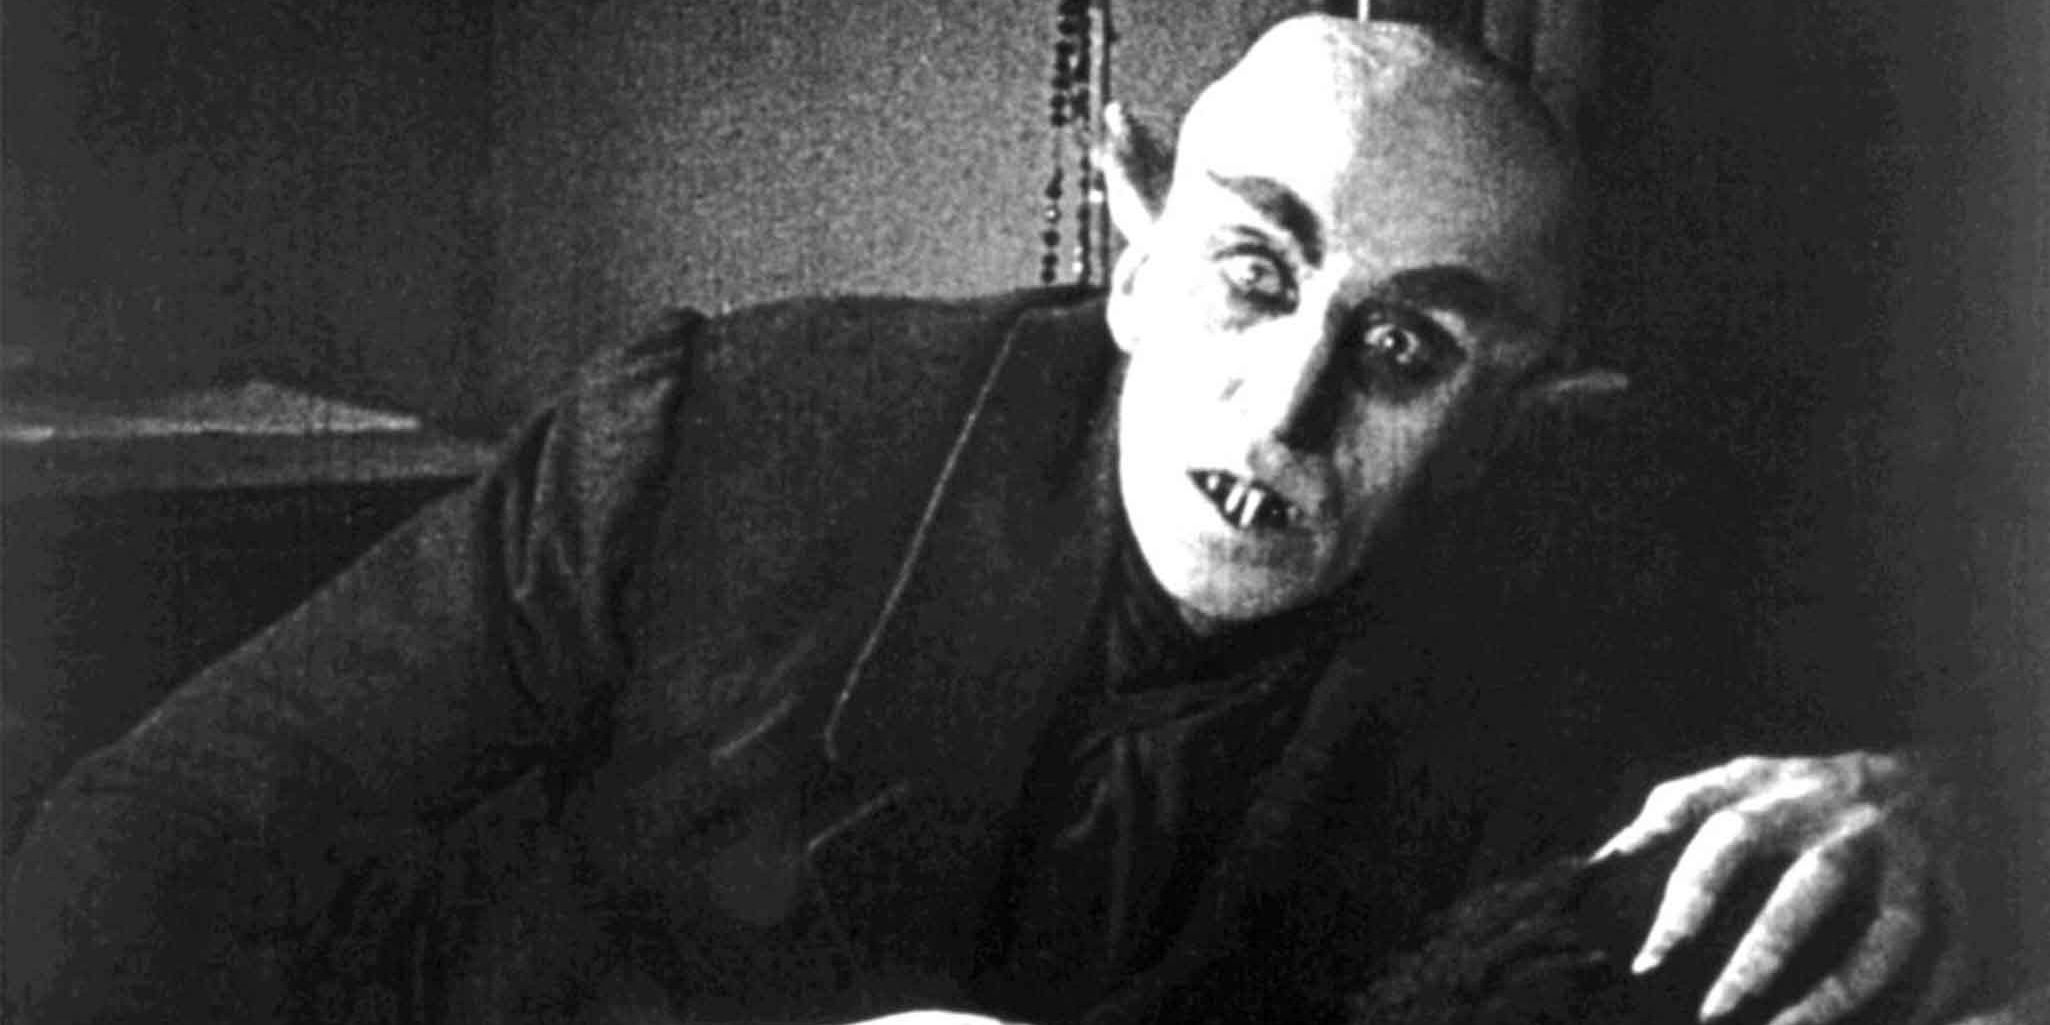 Count Orlok looking into the camera